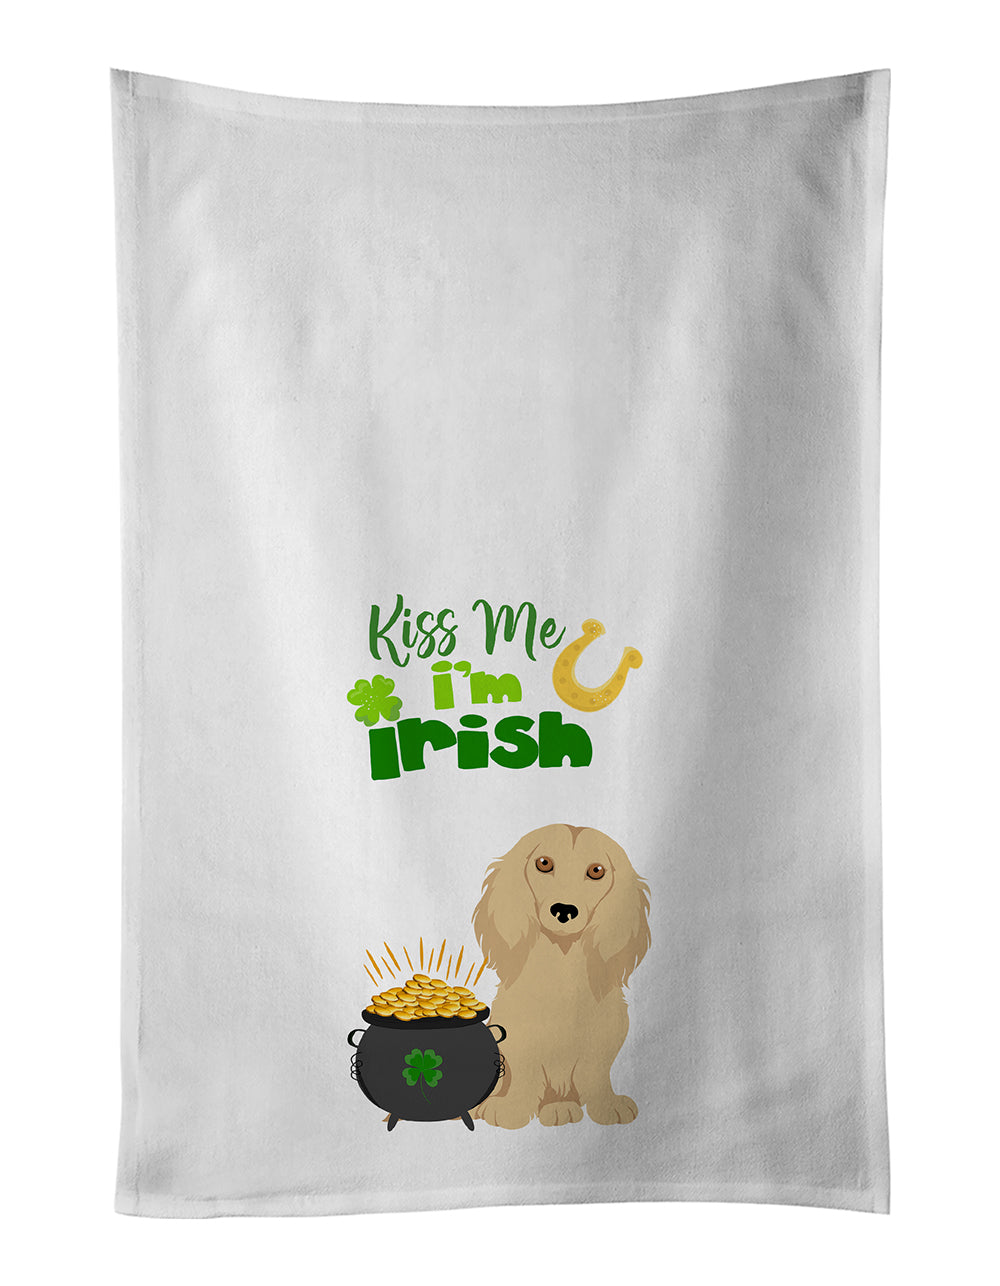 Buy this Longhair Cream Dachshund St. Patrick's Day White Kitchen Towel Set of 2 Dish Towels